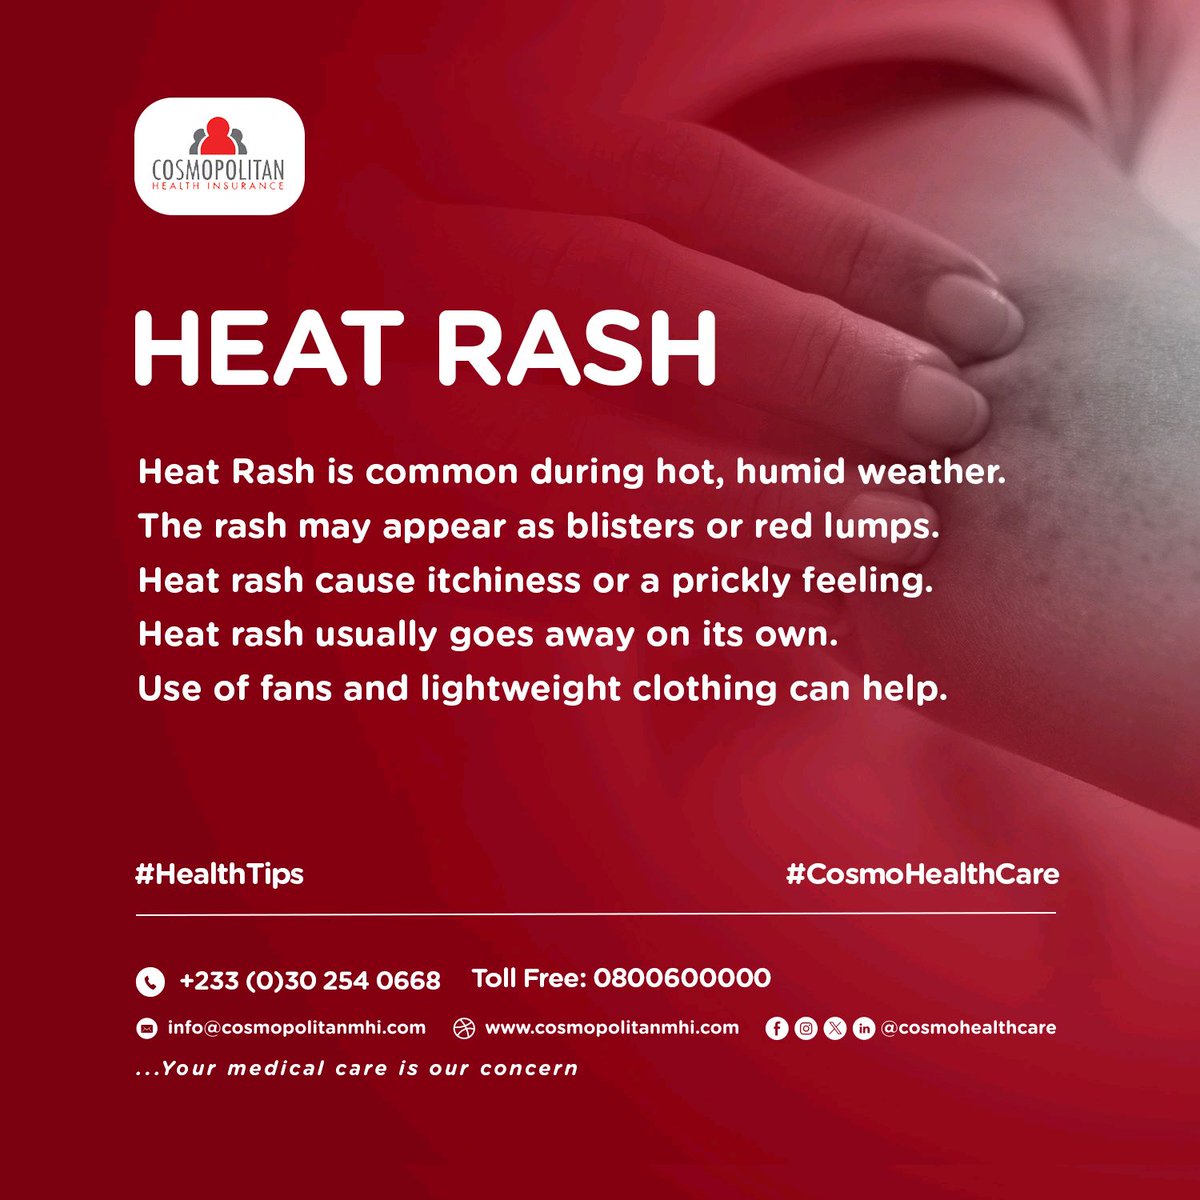 It's FRIDAY! 

Today, we continue on our #HealthTips.

What is HEAT RASH? 

Share your thoughts with us in the comments.

Stay healthy, Stay Safe and Stay Insured!

#CosmoHealthCare
#TGIF